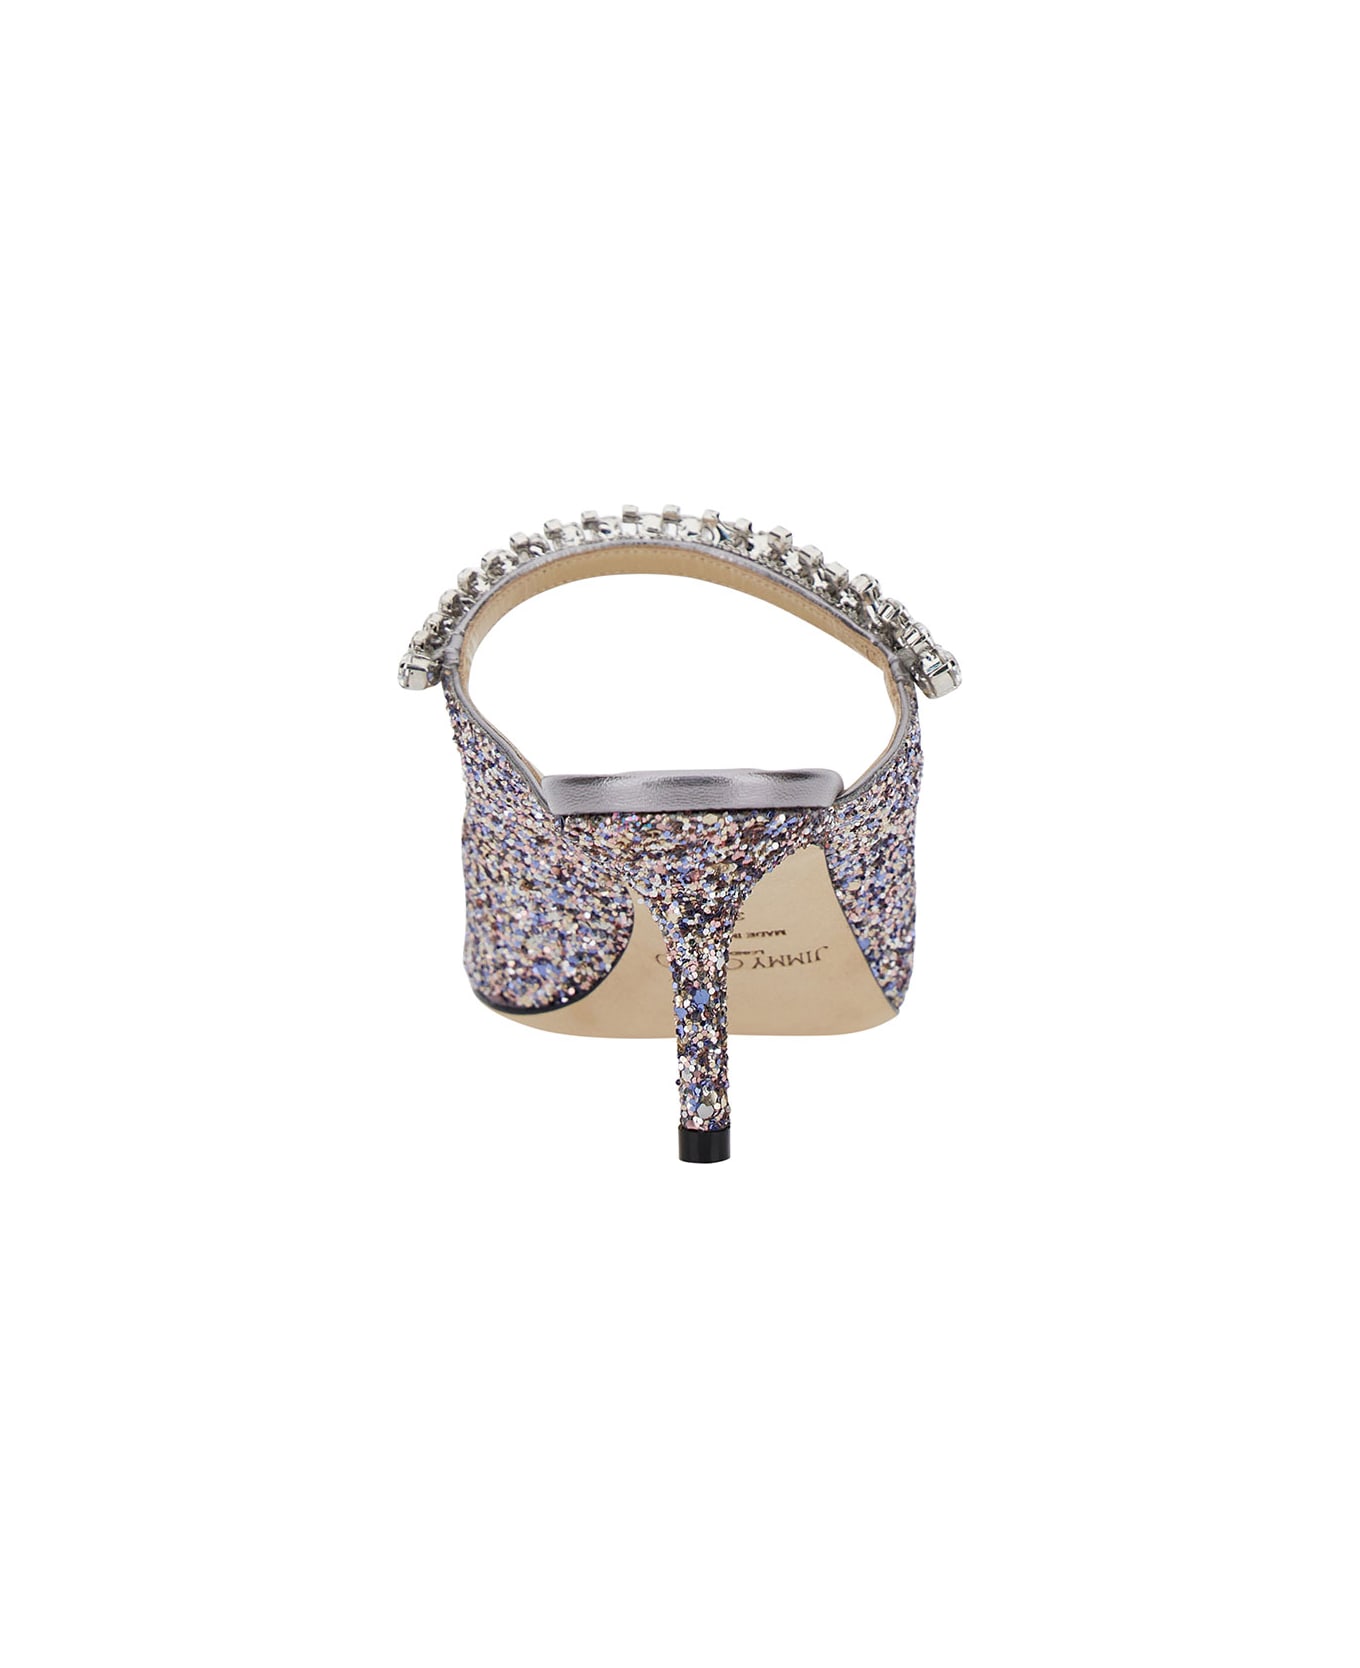 Jimmy Choo 'bing 65' Multicolor Sabot With Crystal Strap In Leather Woman - Metallic サンダル